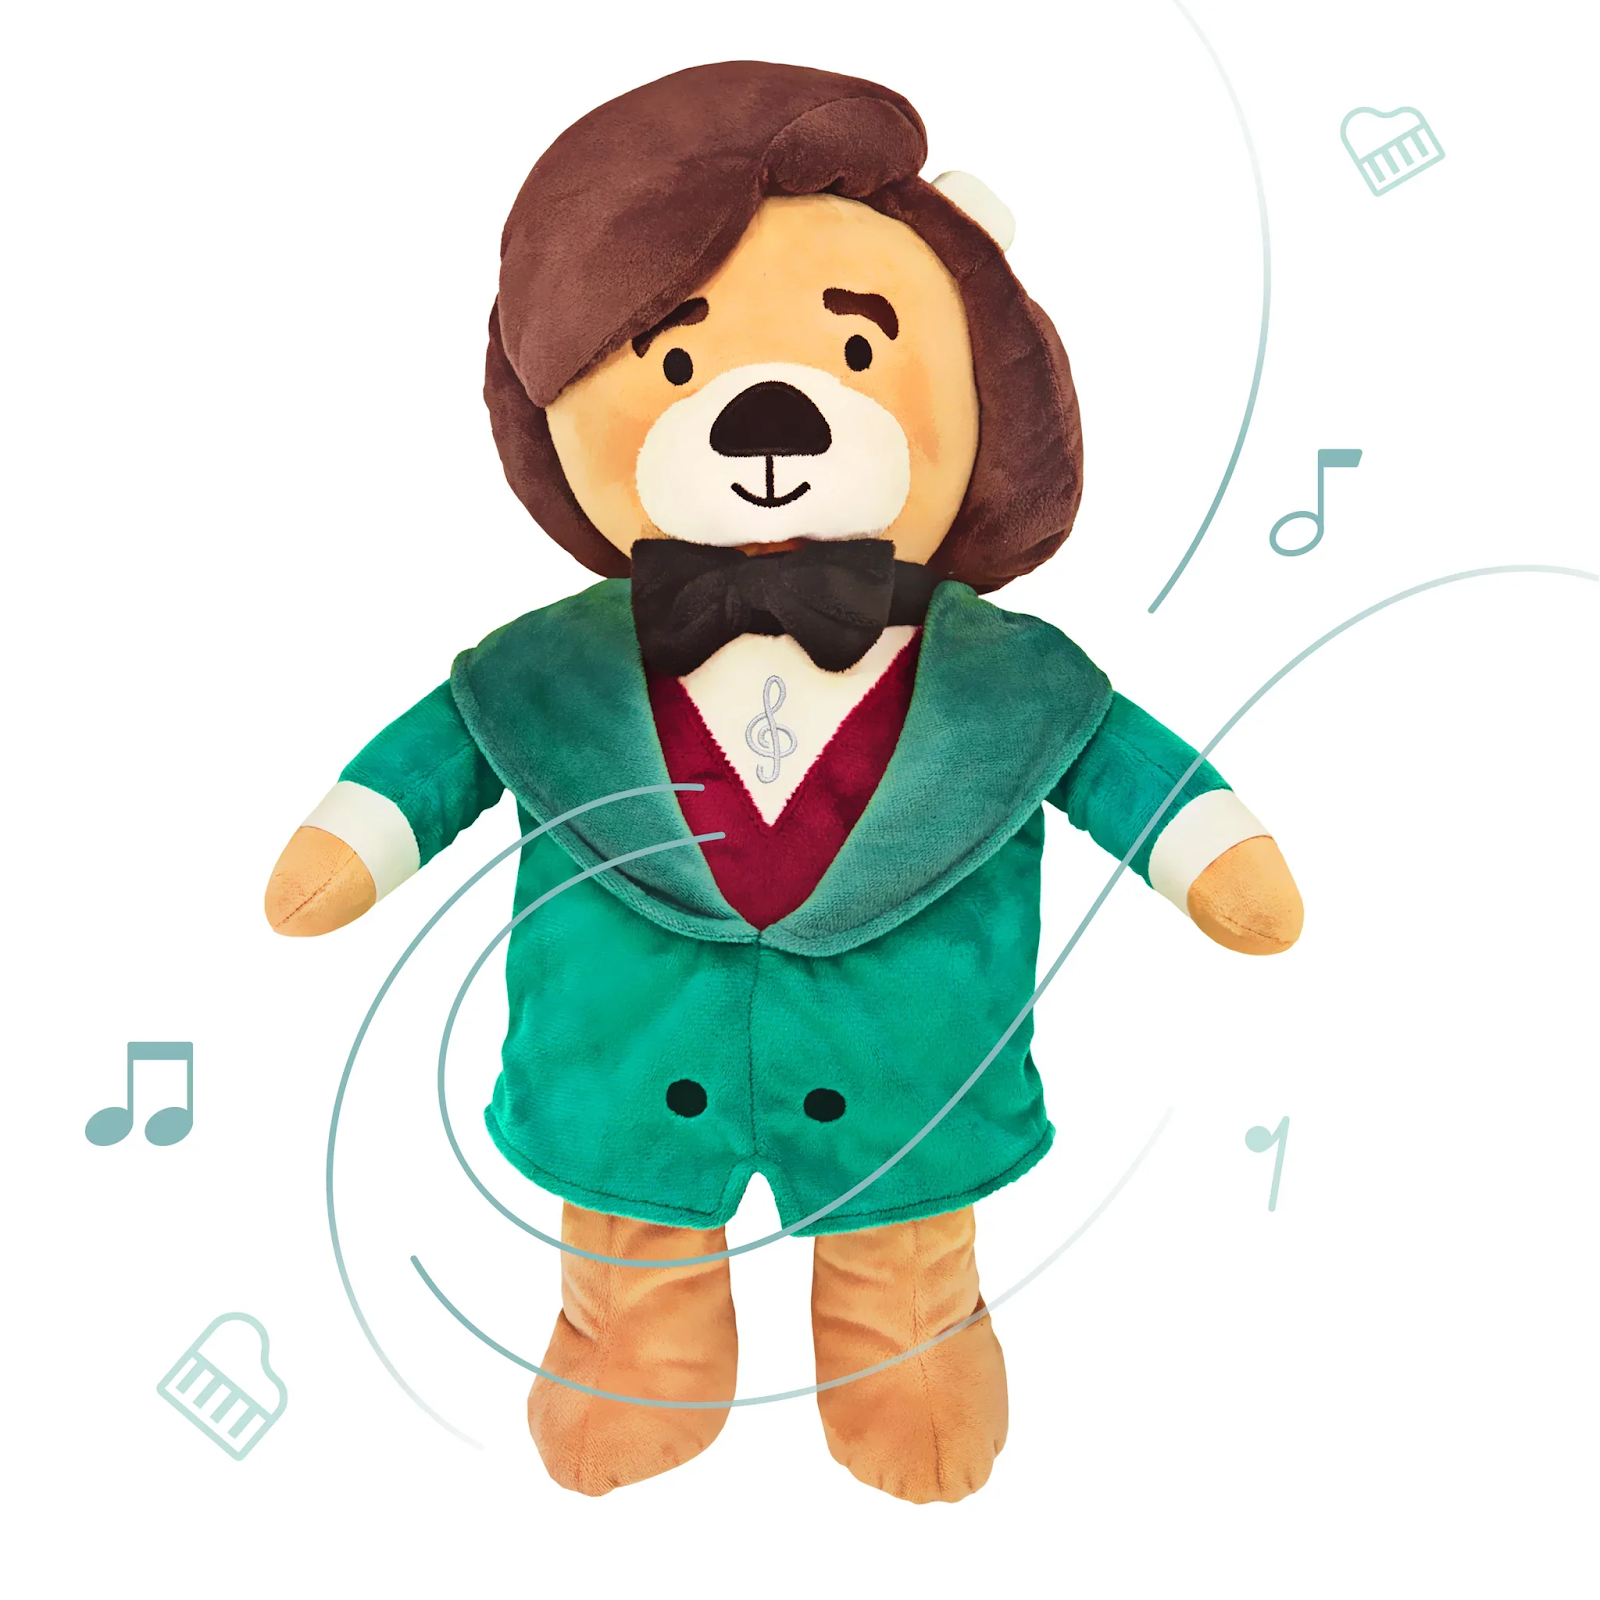 A stuffed bear in a green suit and bow tie, perfect for Music With Toys, Gifts, Baby’s First